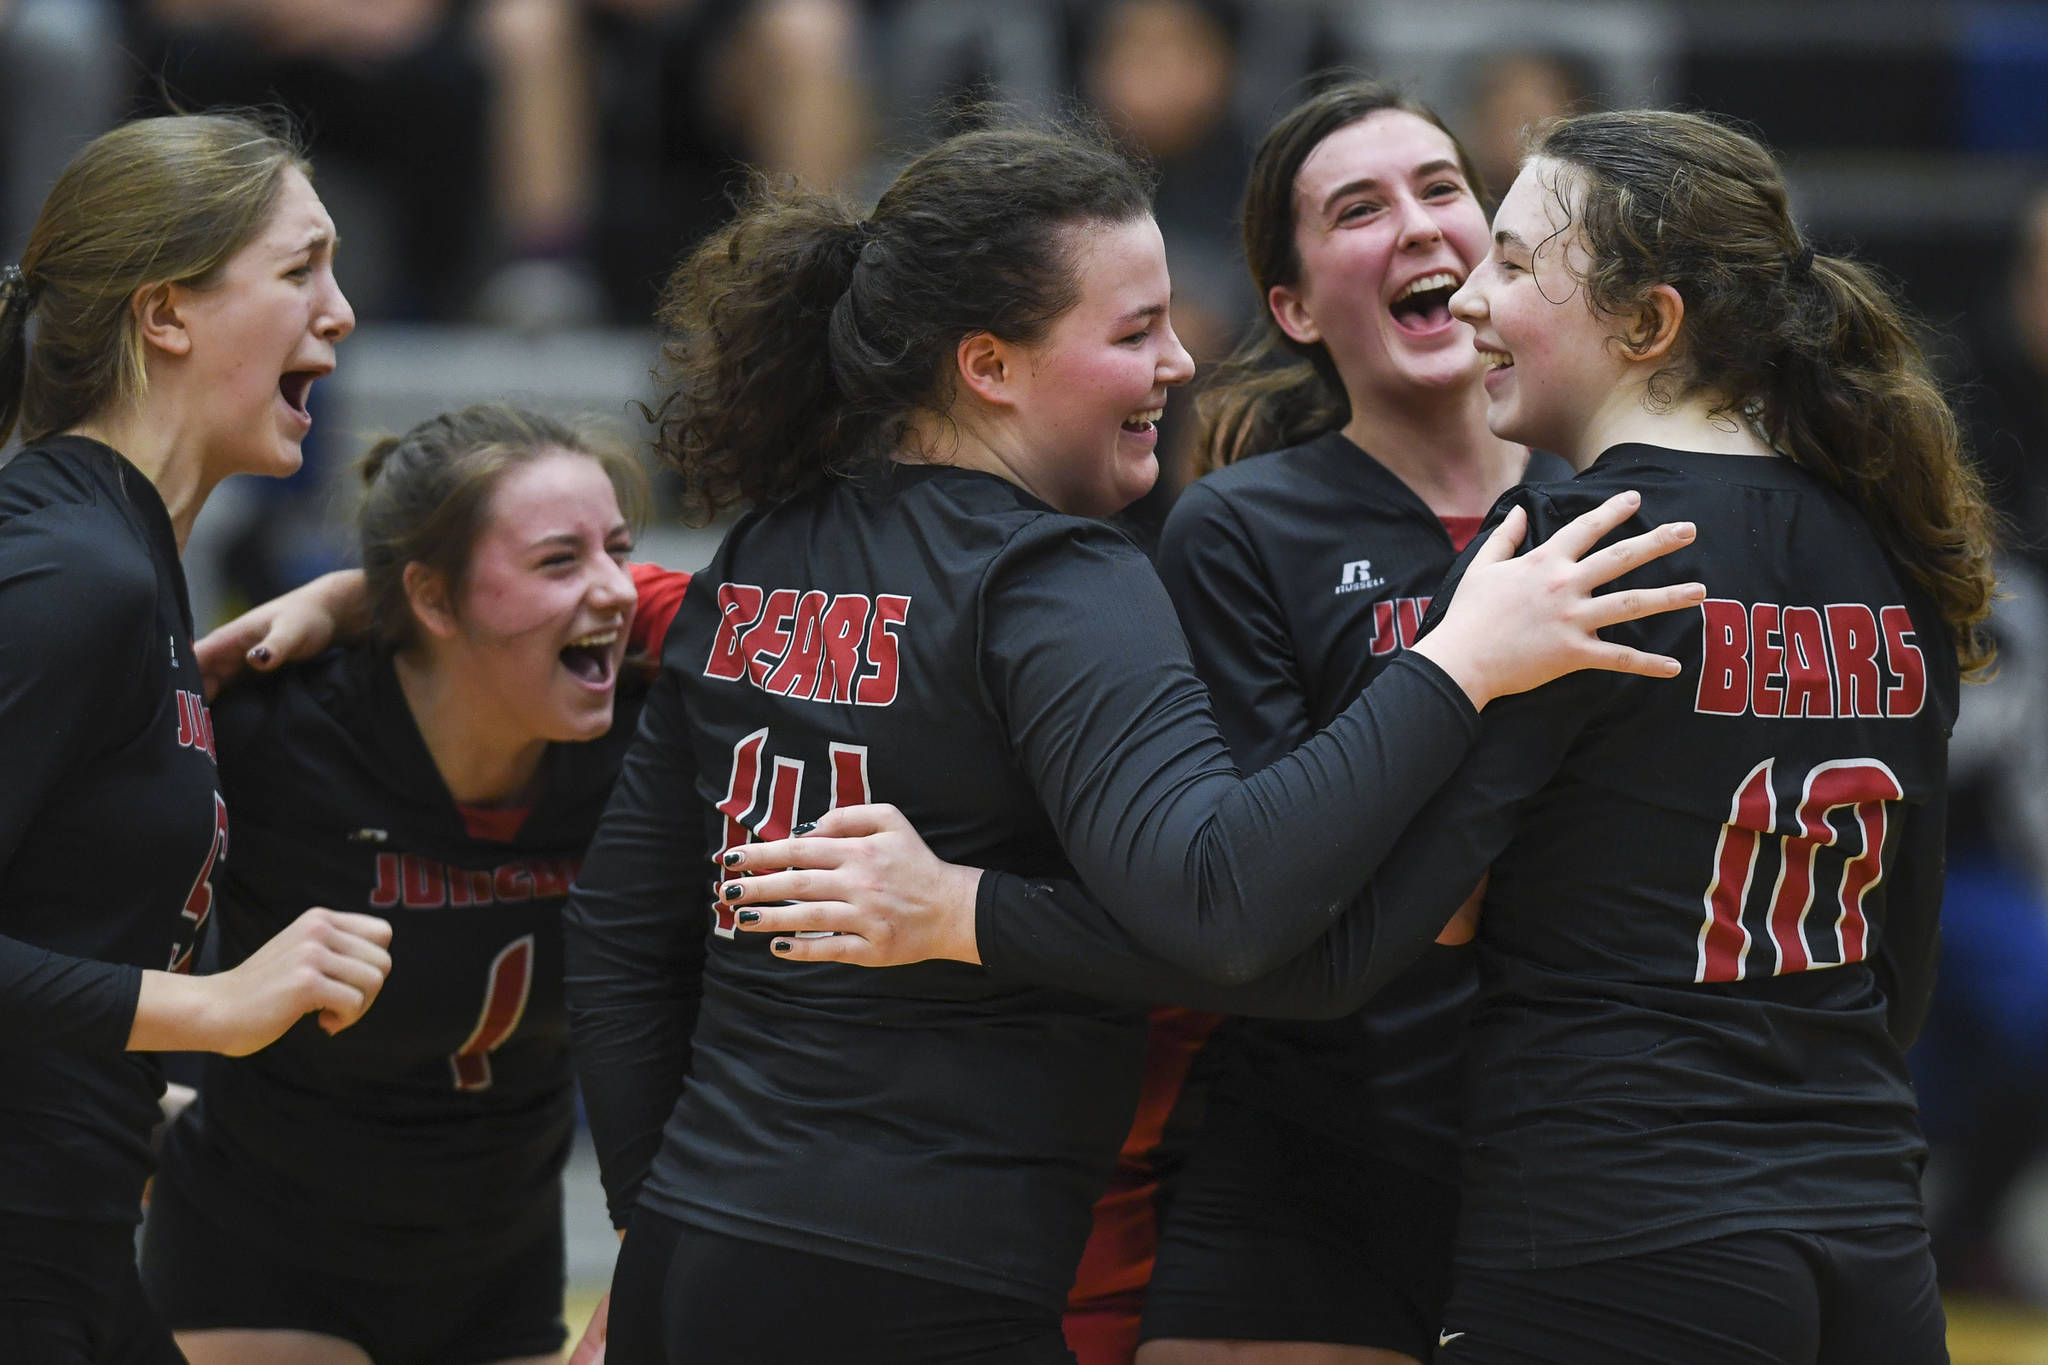 Juneau-Douglas’ Brooke Sanford, left, Kiana Potter, Gabi Griggs, Addie Prussing and Merry Newman, right, celebrate their win over Thunder Mountain during the Region V Volleyball Tournament at Thunder Mountain High School on Friday, Nov. 8, 2019. JDHS won 25-22, 26-24, 25-20. (Michael Penn | Juneau Empire)